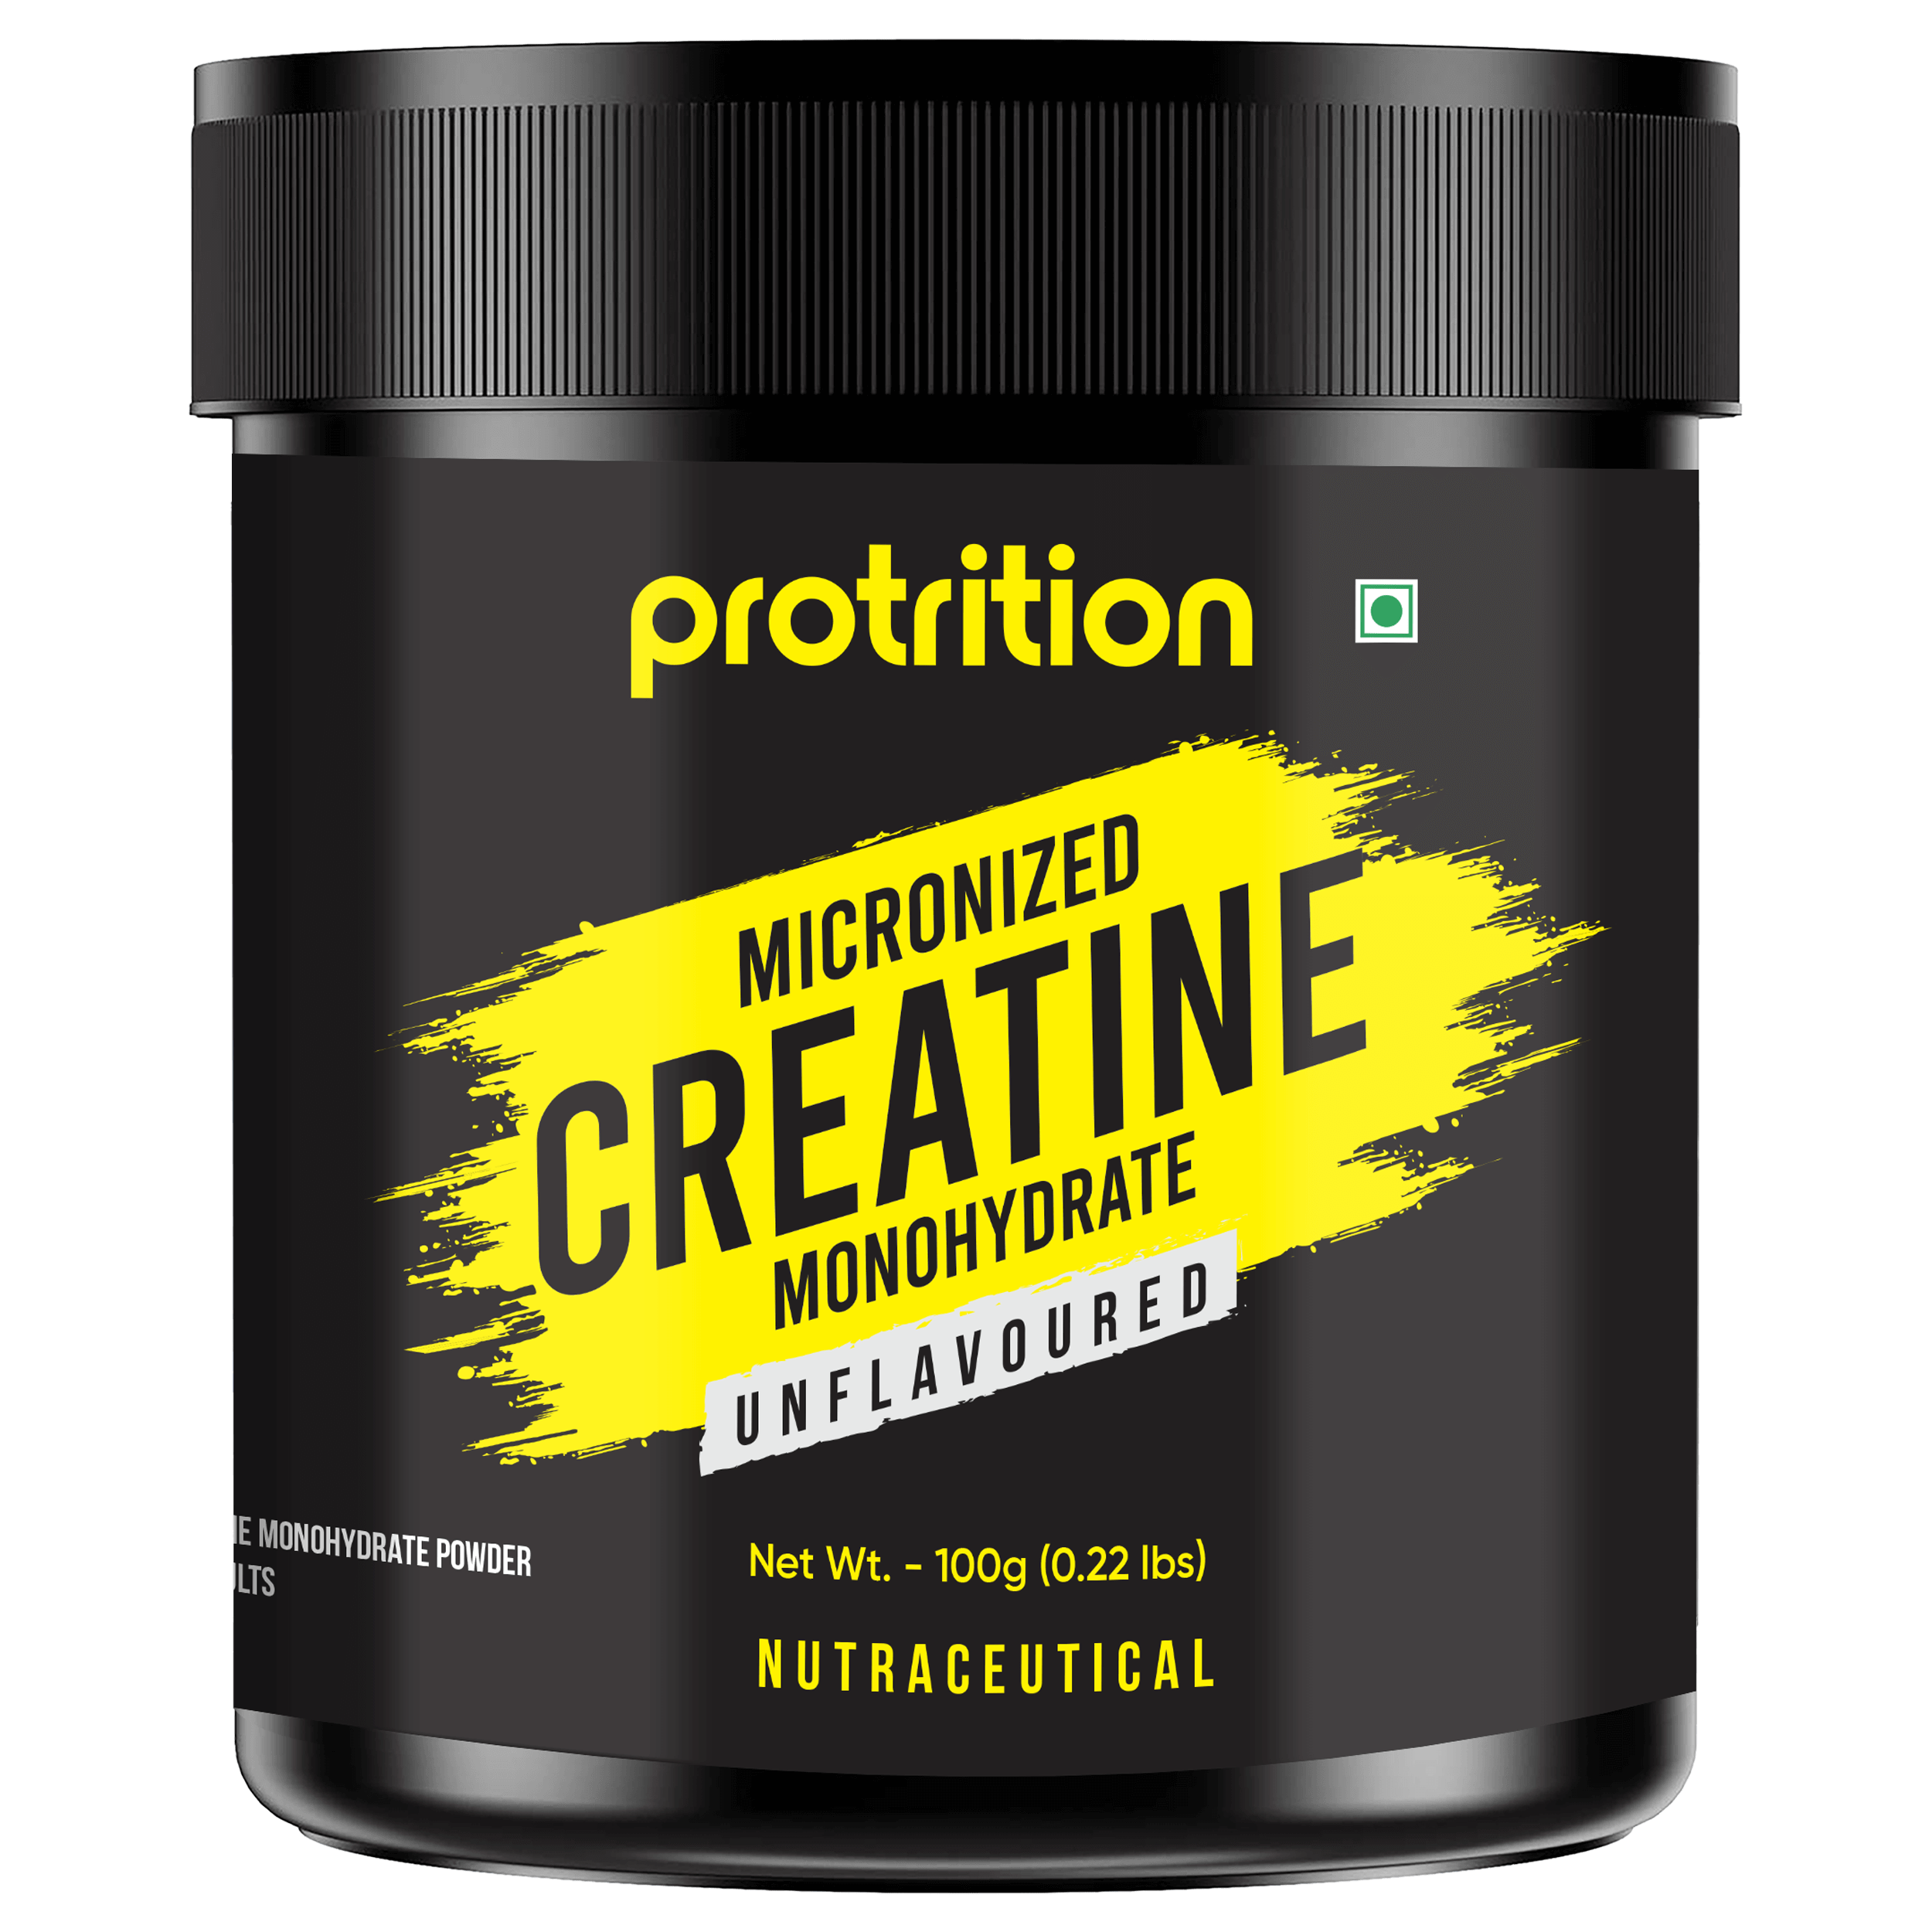 Protrition Micronized Creatine Monohydrate, 100g, Unflavoured